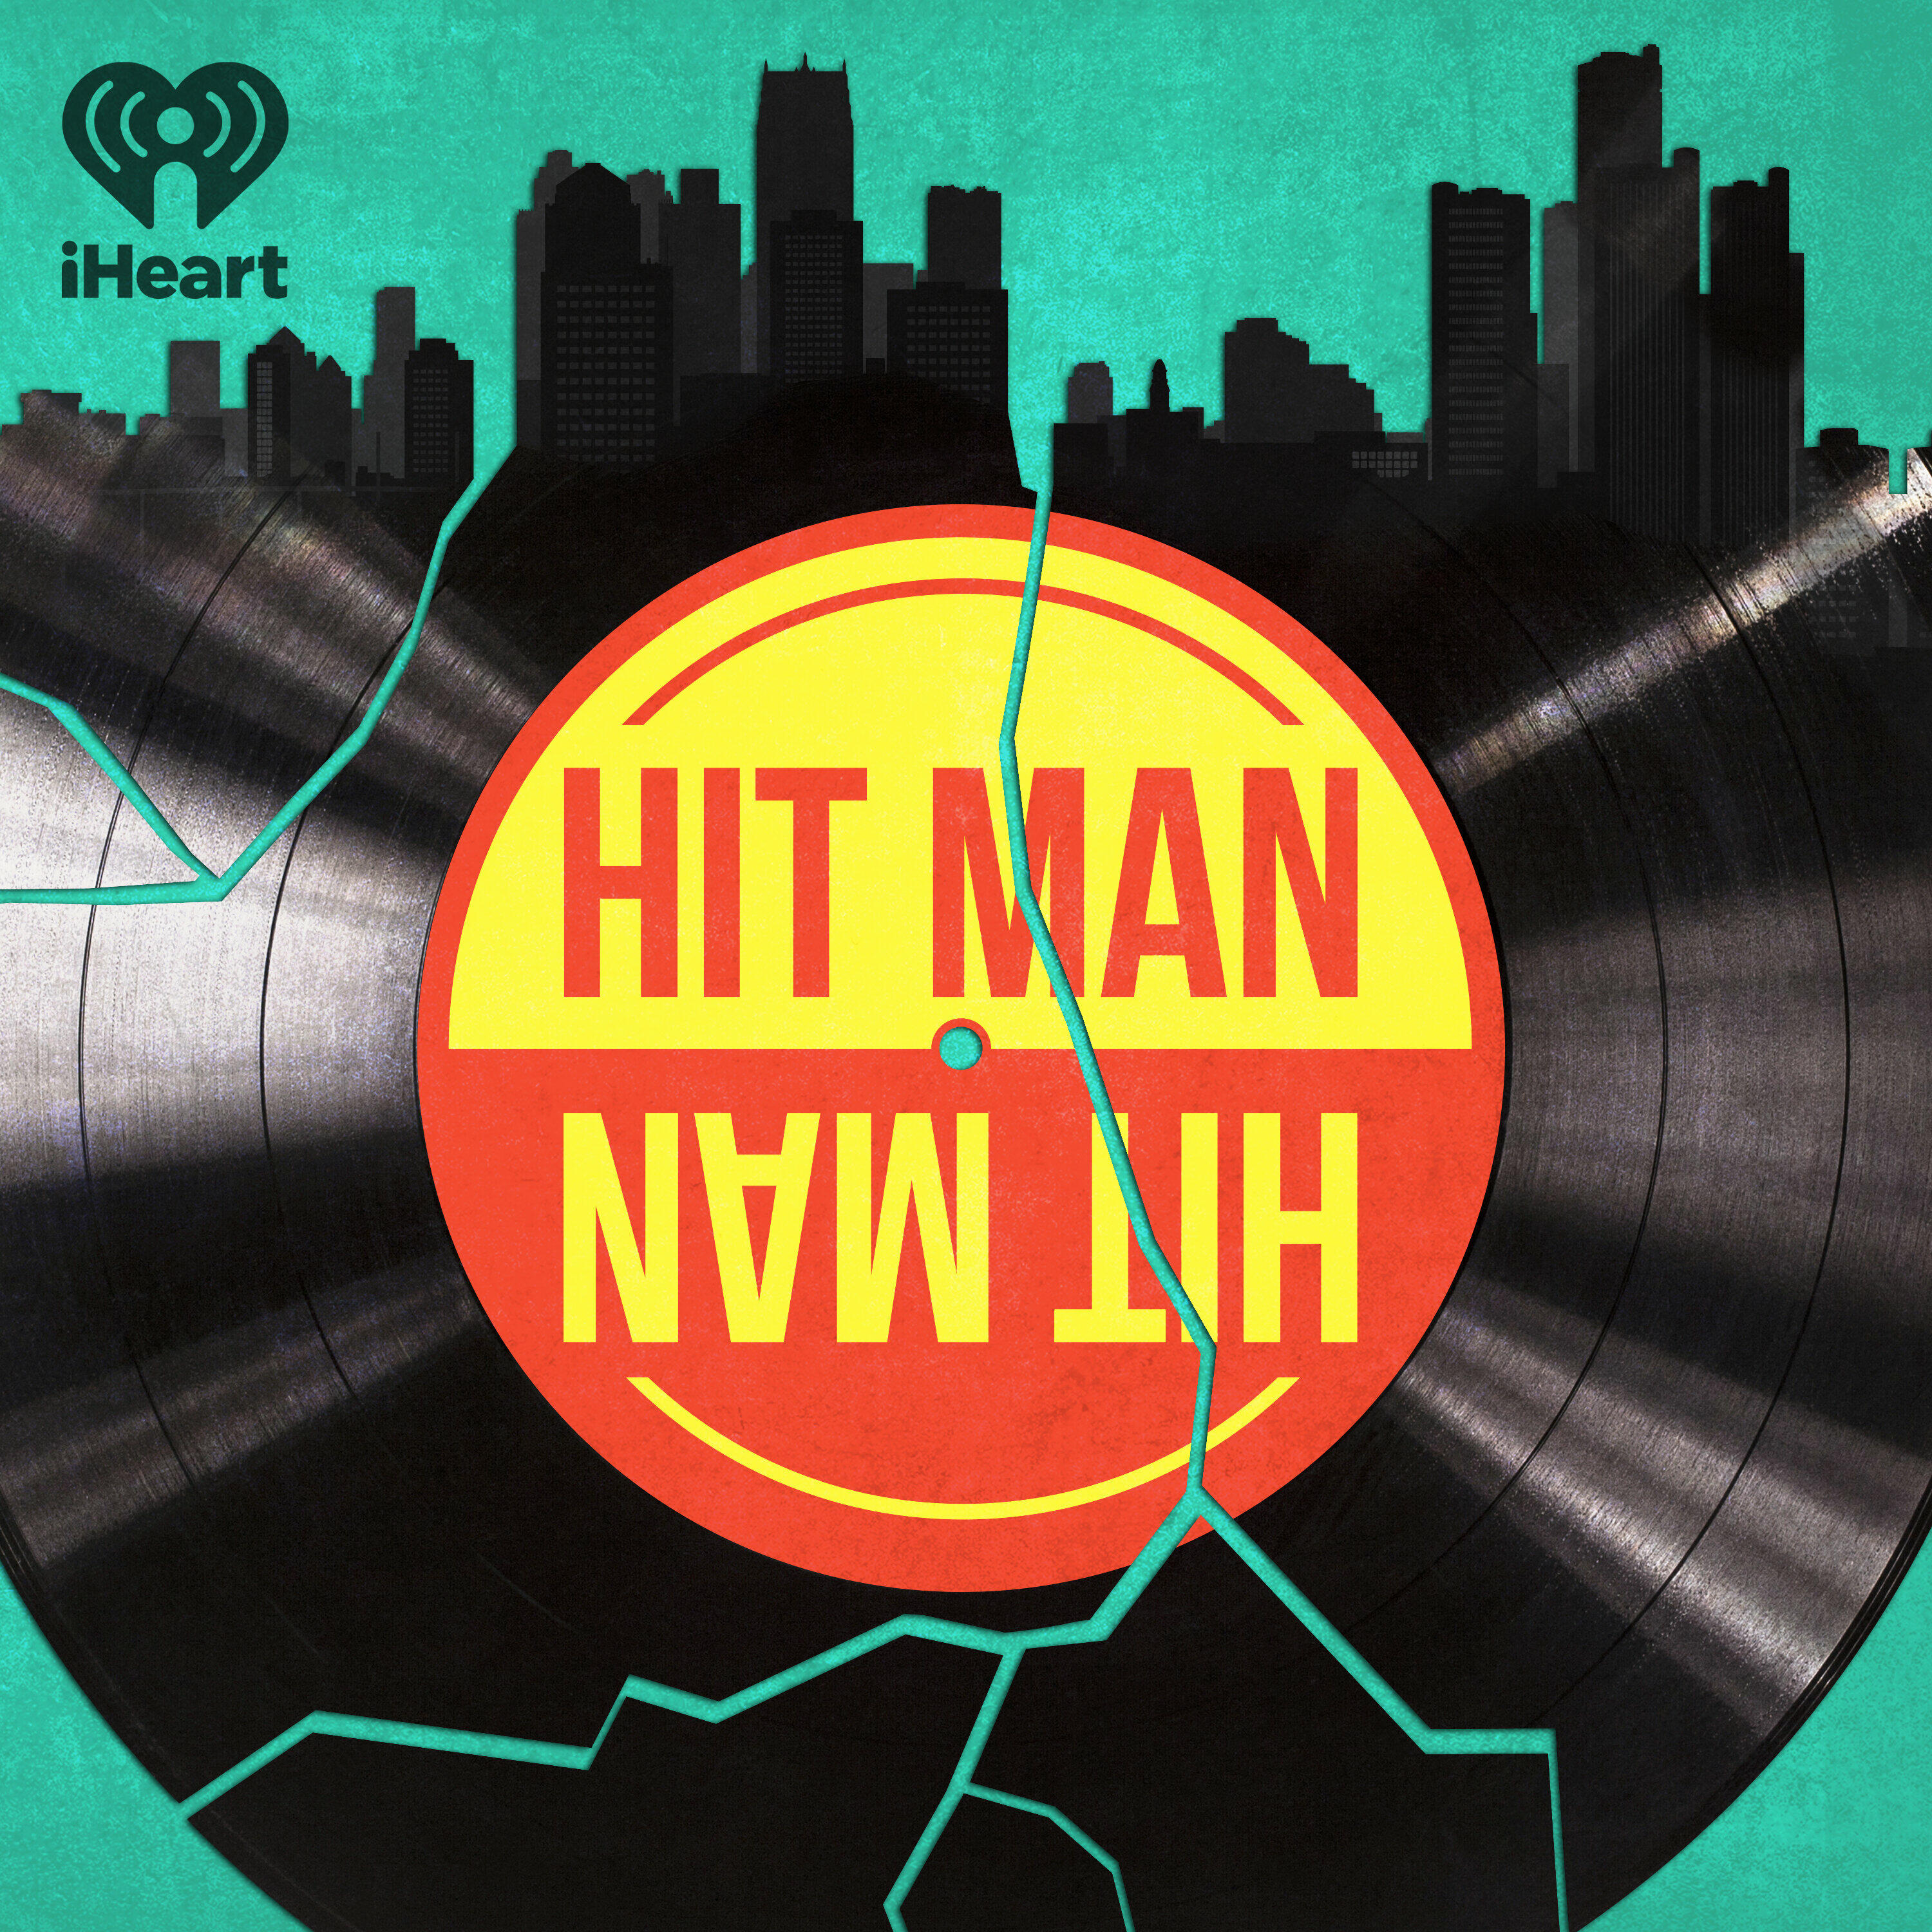 Listen to the Hit Man Episode Introducing Hit Man on iHeartRadio